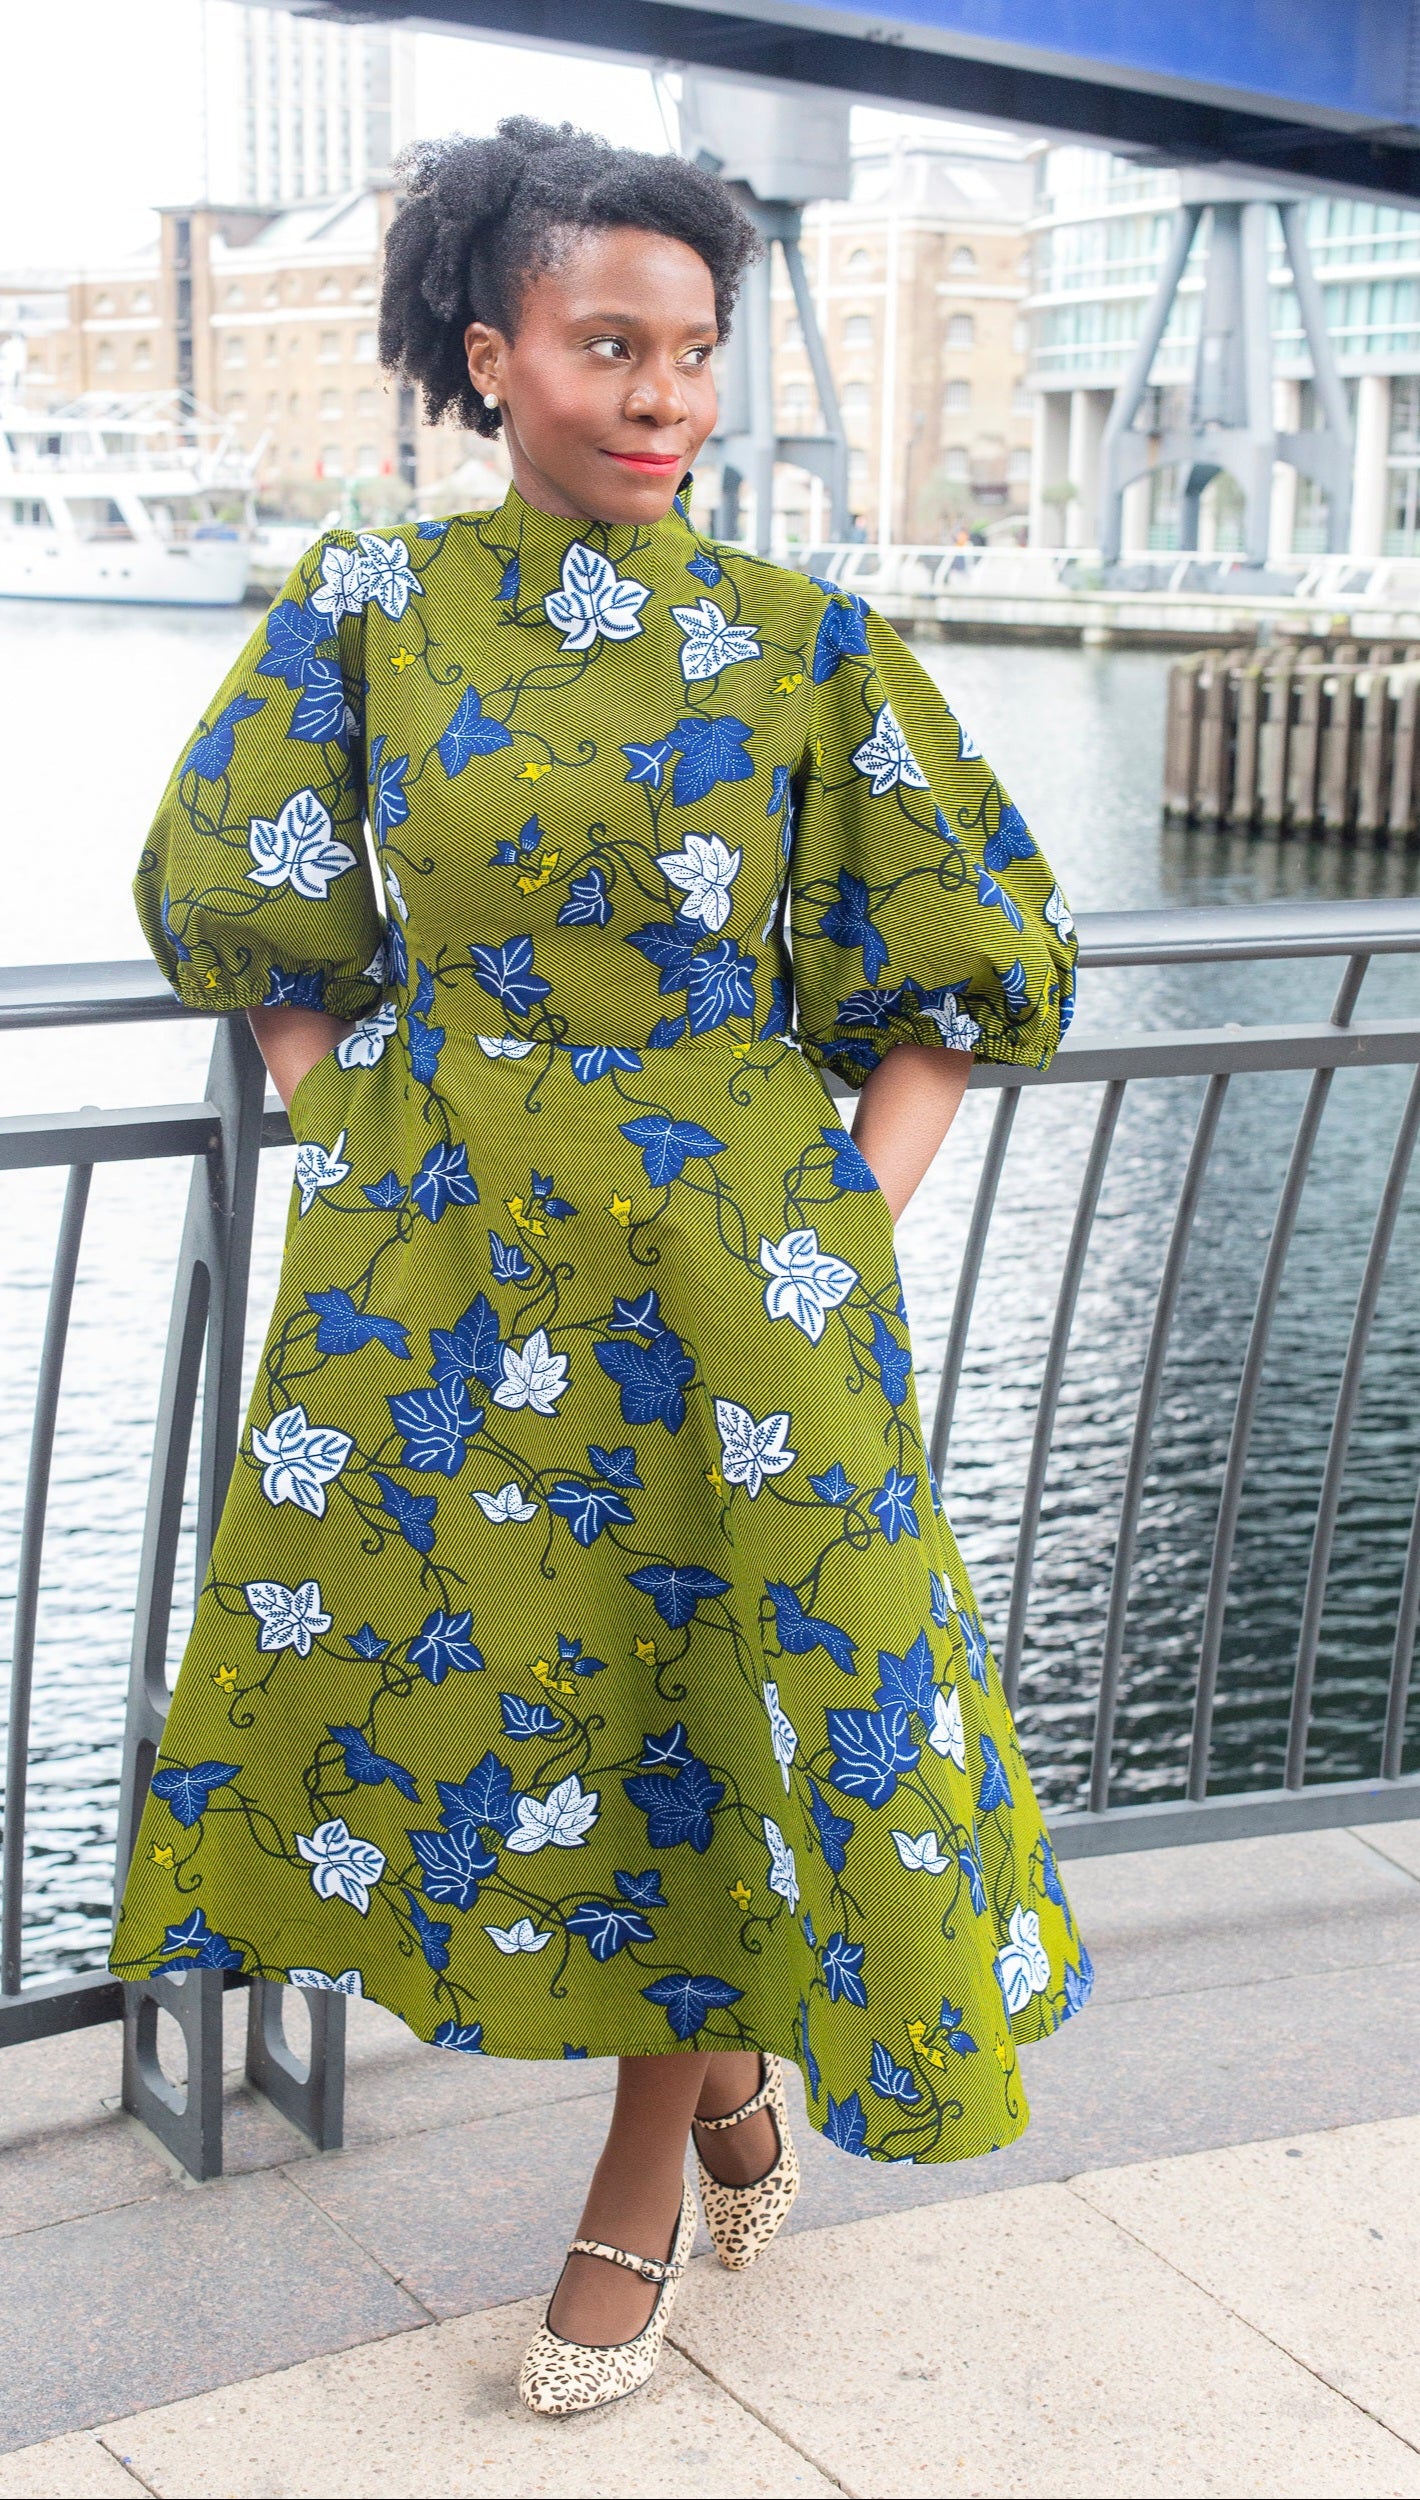 A woman posing on a bridge in a khaki dress adorned with detailed blue and white leaves.